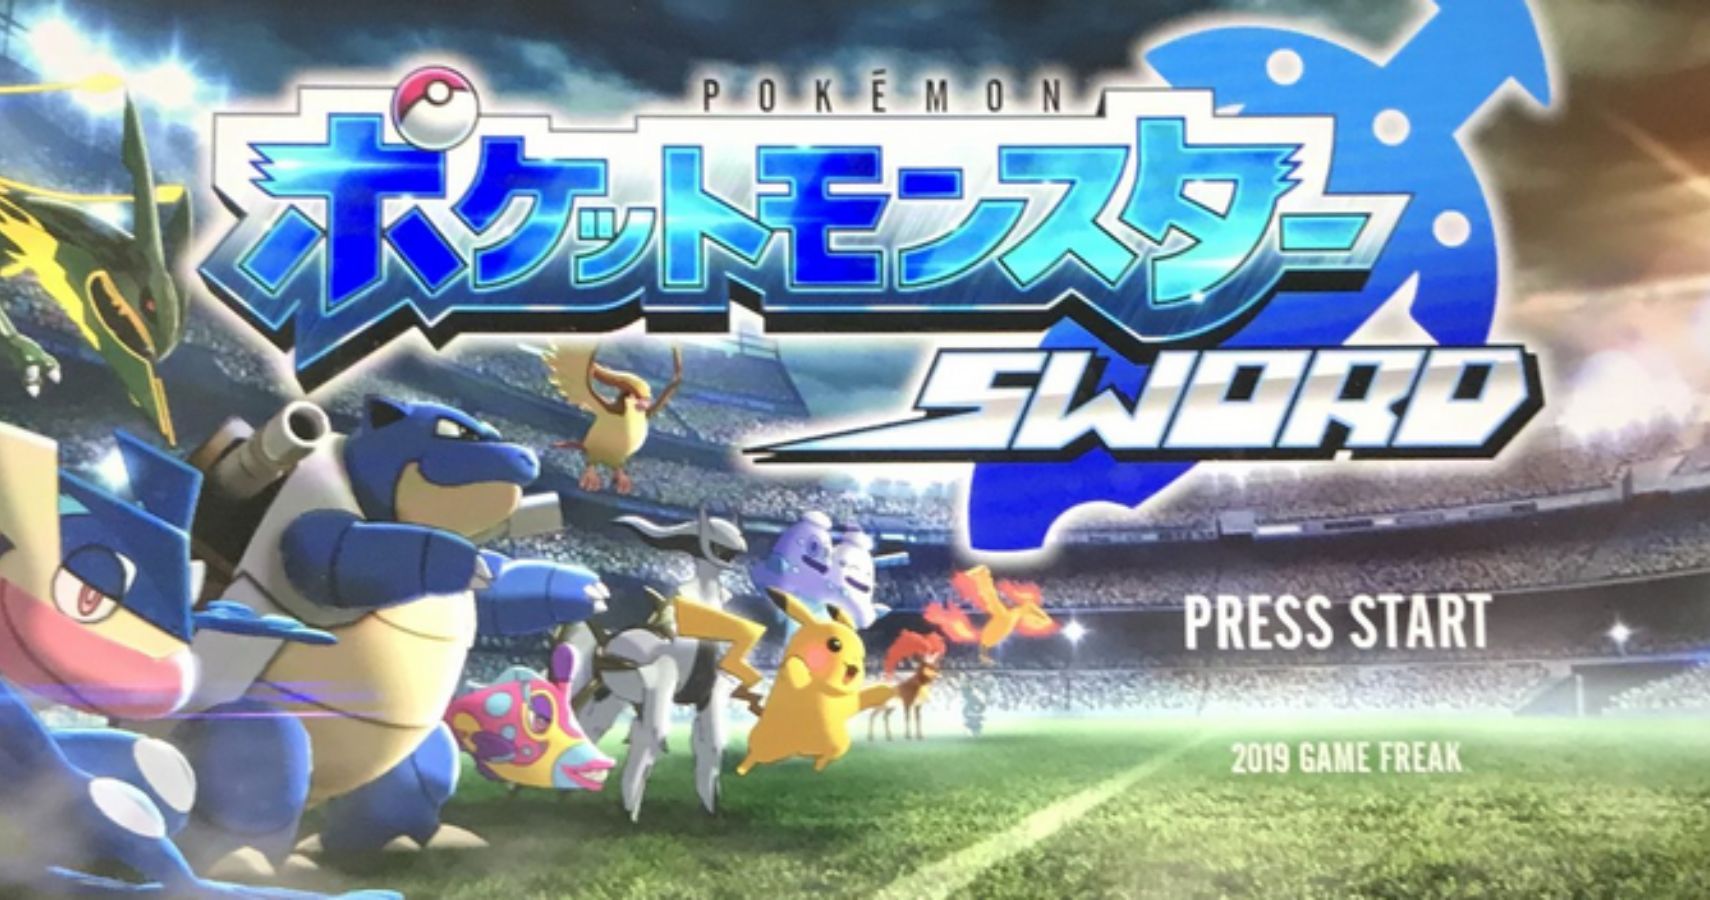 Leaked Pokemon Sword Beta Reveals Pokemon Who Were Cut From The Final Game